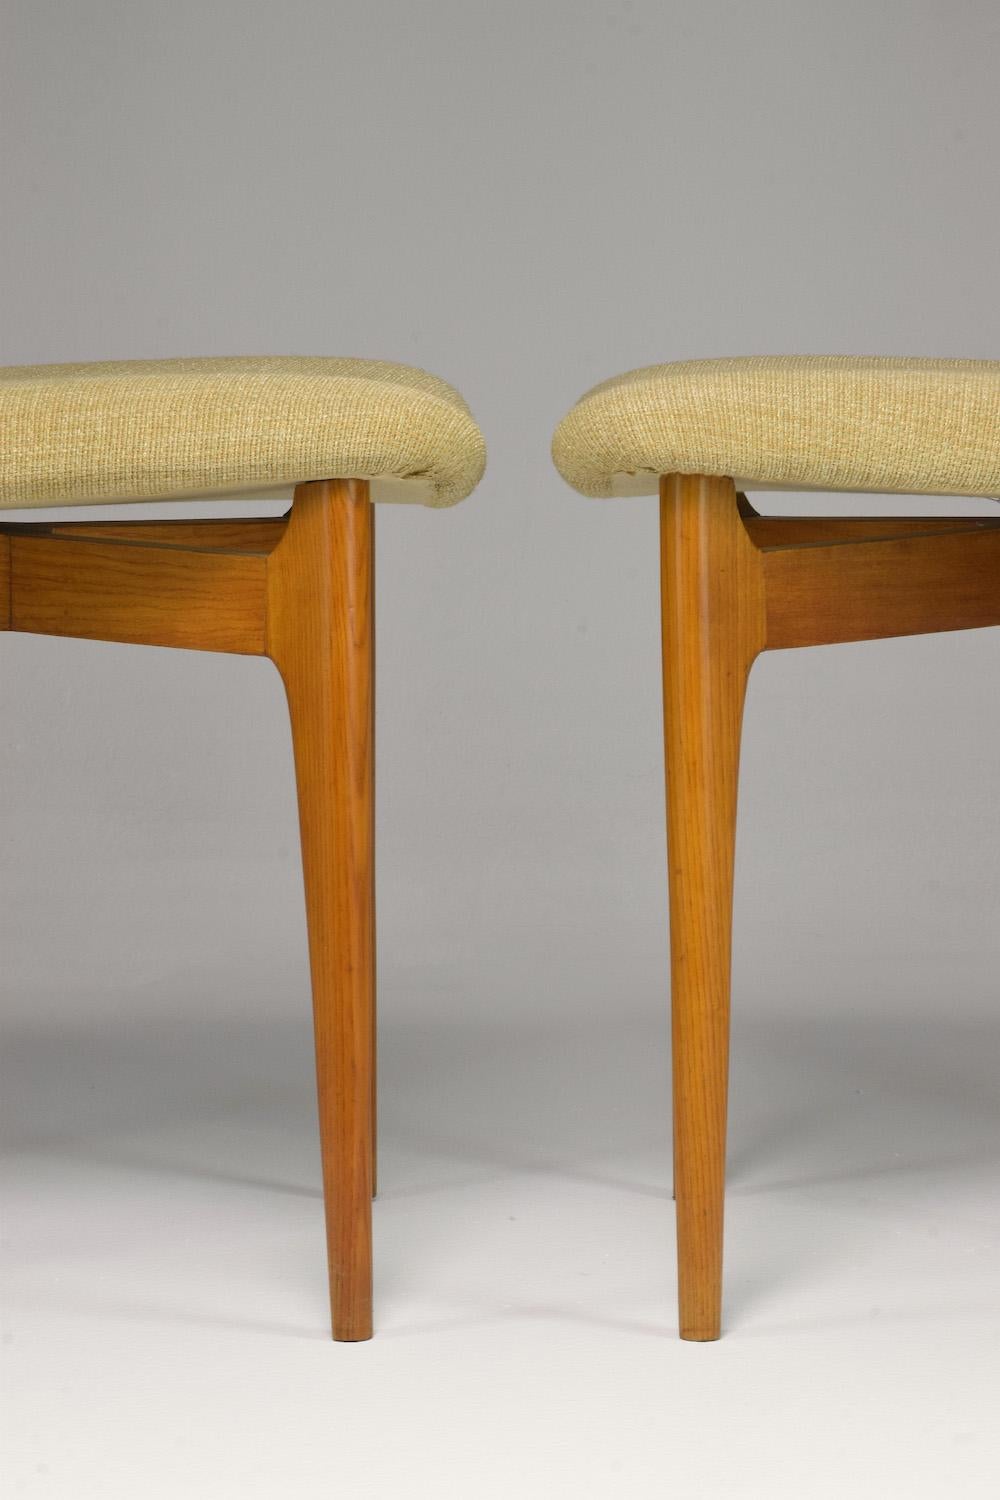 20th Century 1950's Italian Chairs by Ico and Luisa Parisi for Ariberto Colombo, Set of Two